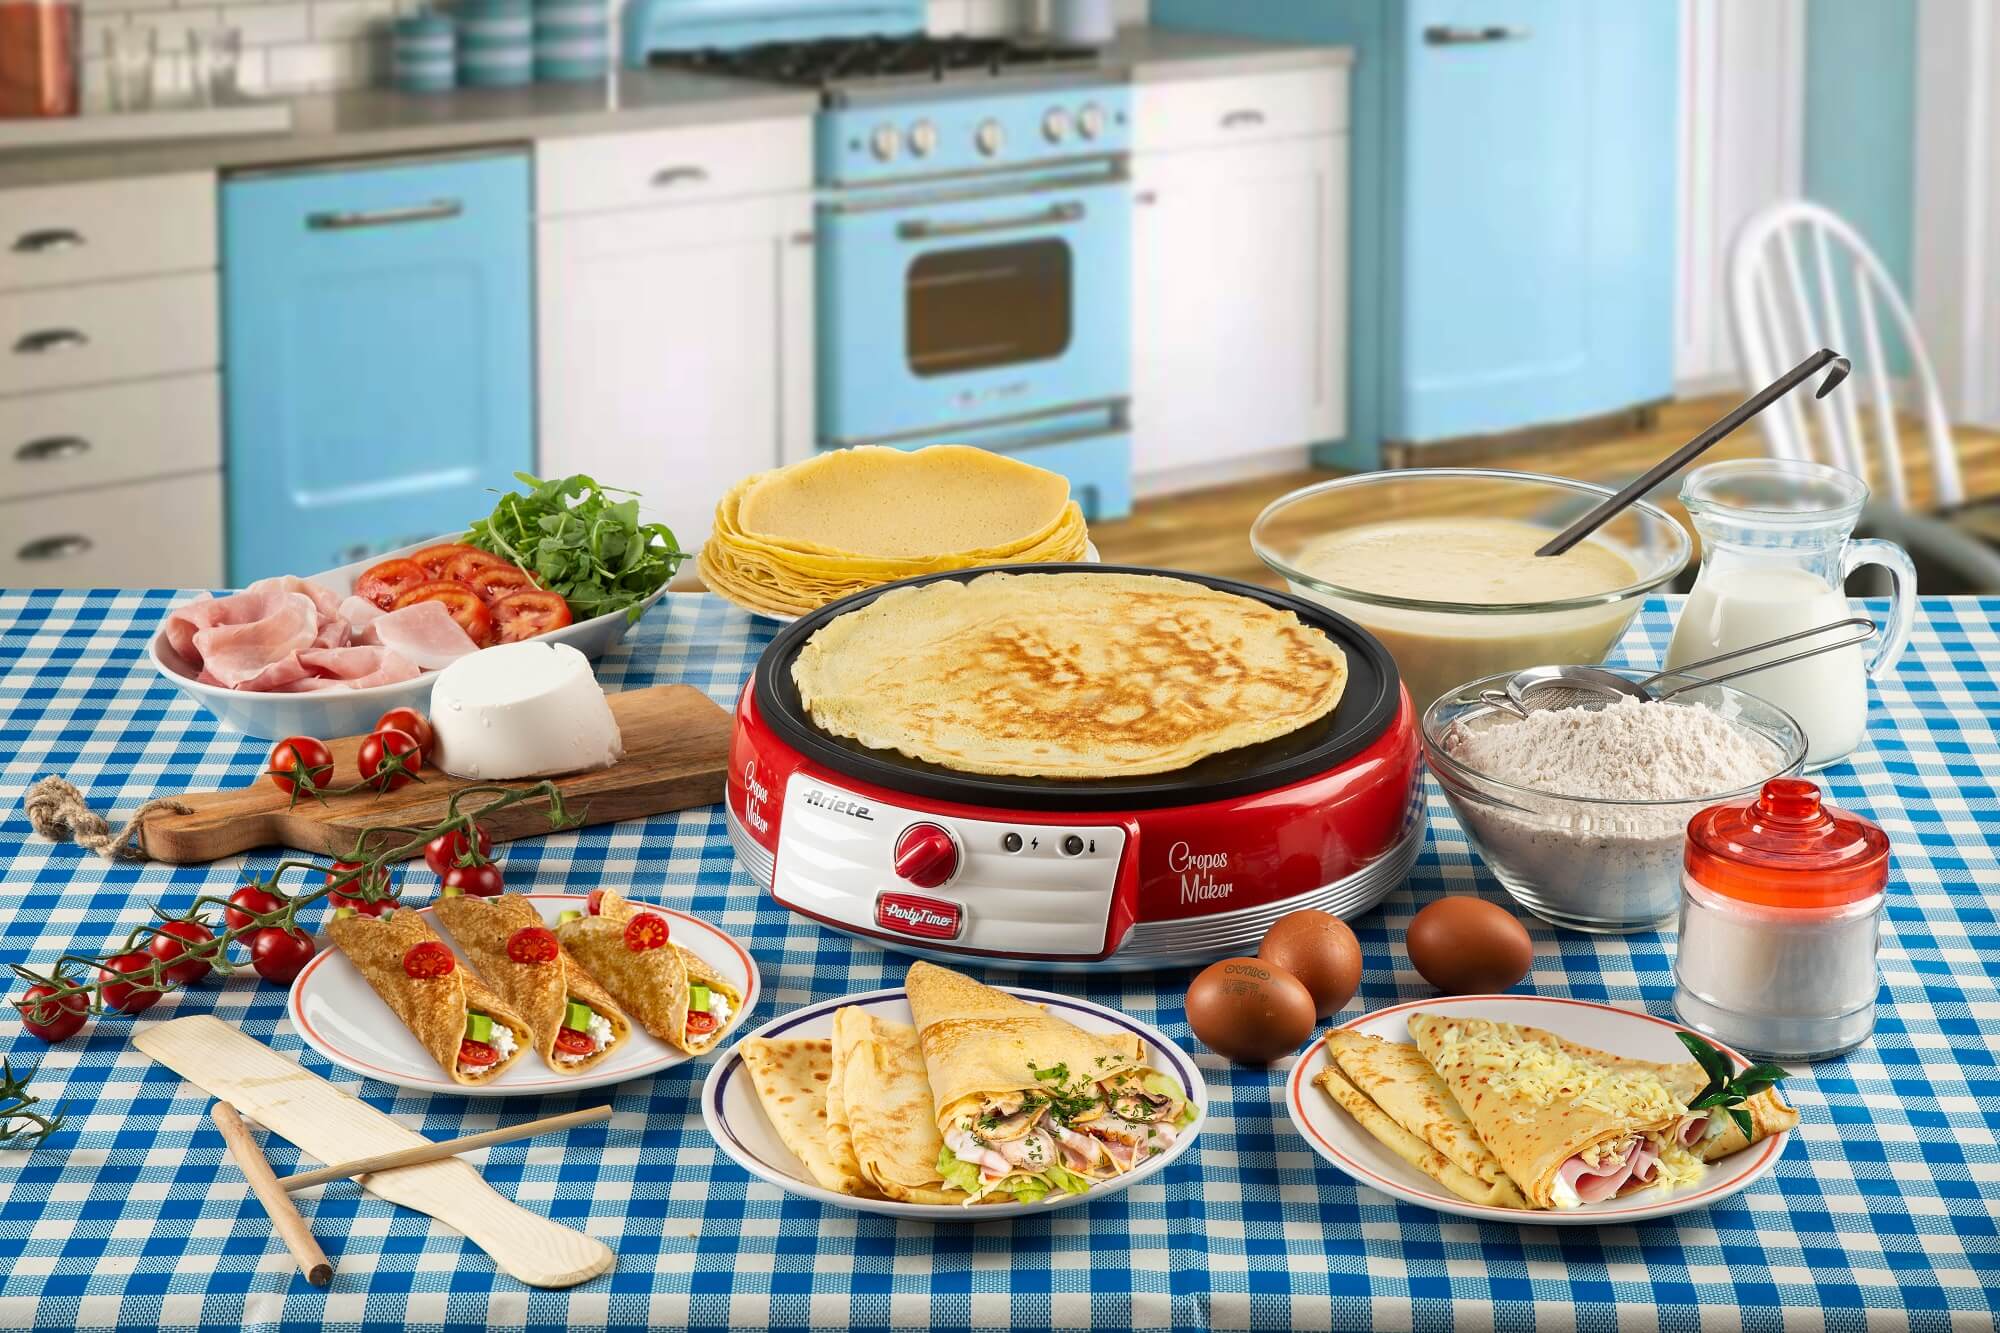 crepes maker party time ariete 202 rosso